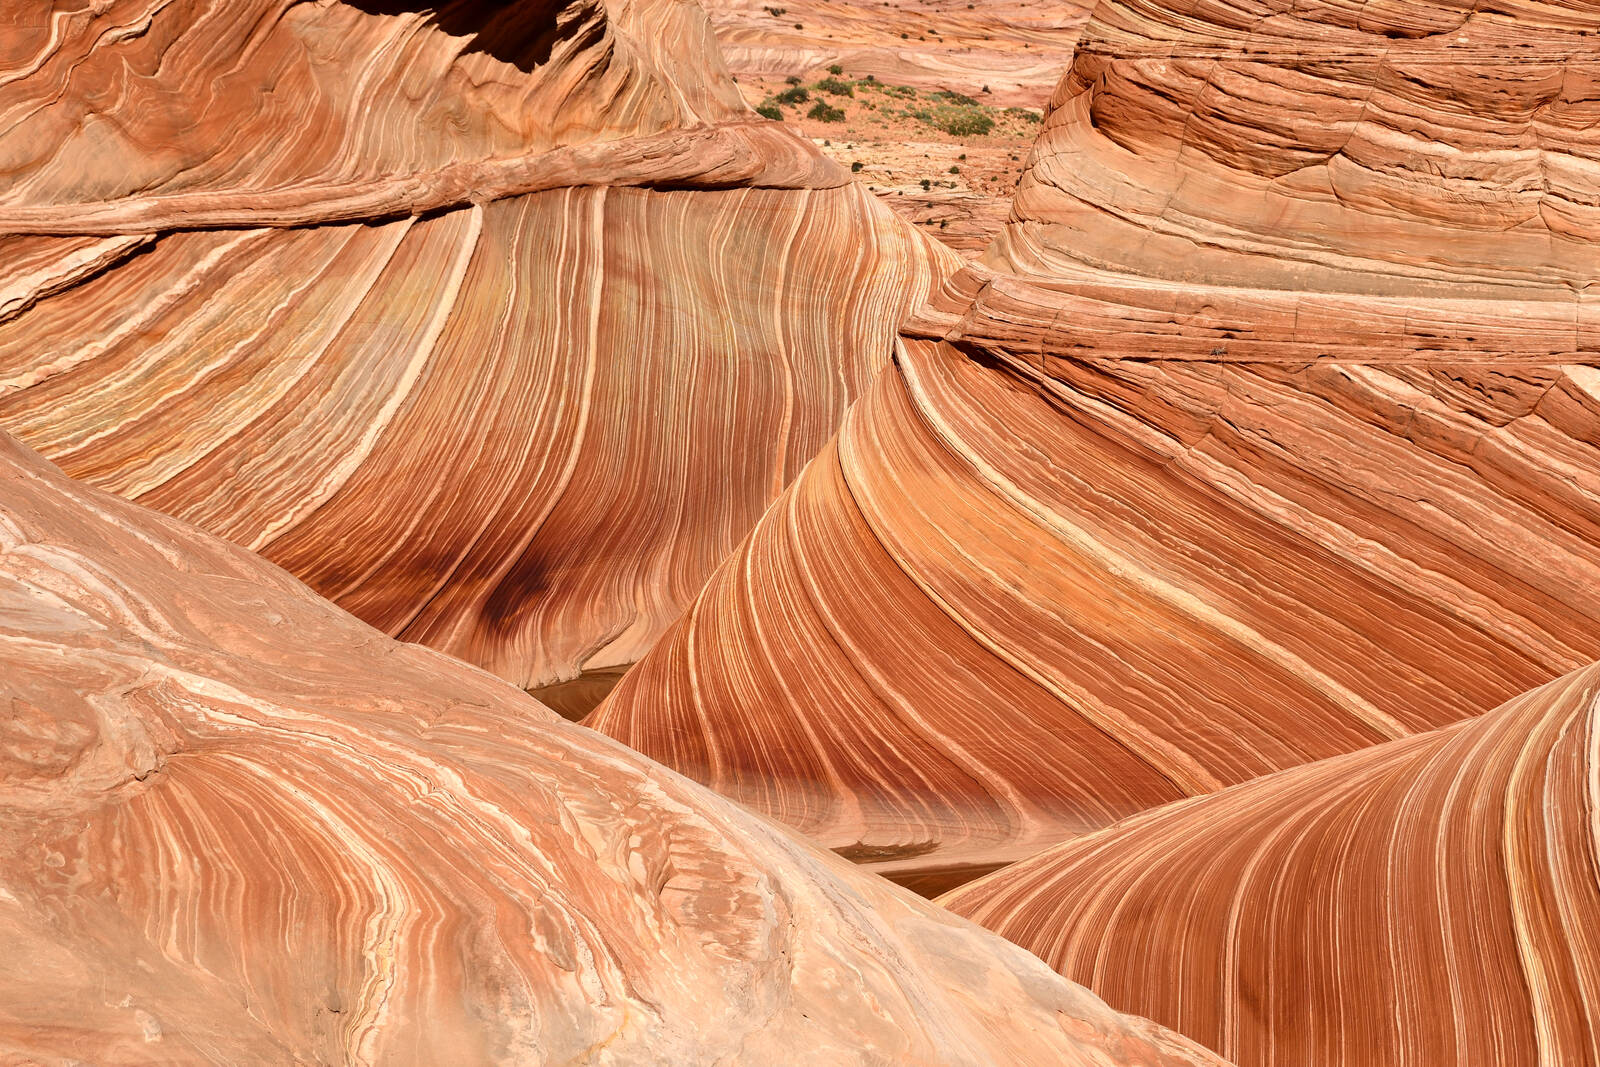 Image of Coyote Buttes North - Heart of the Wave by Rick Merrill